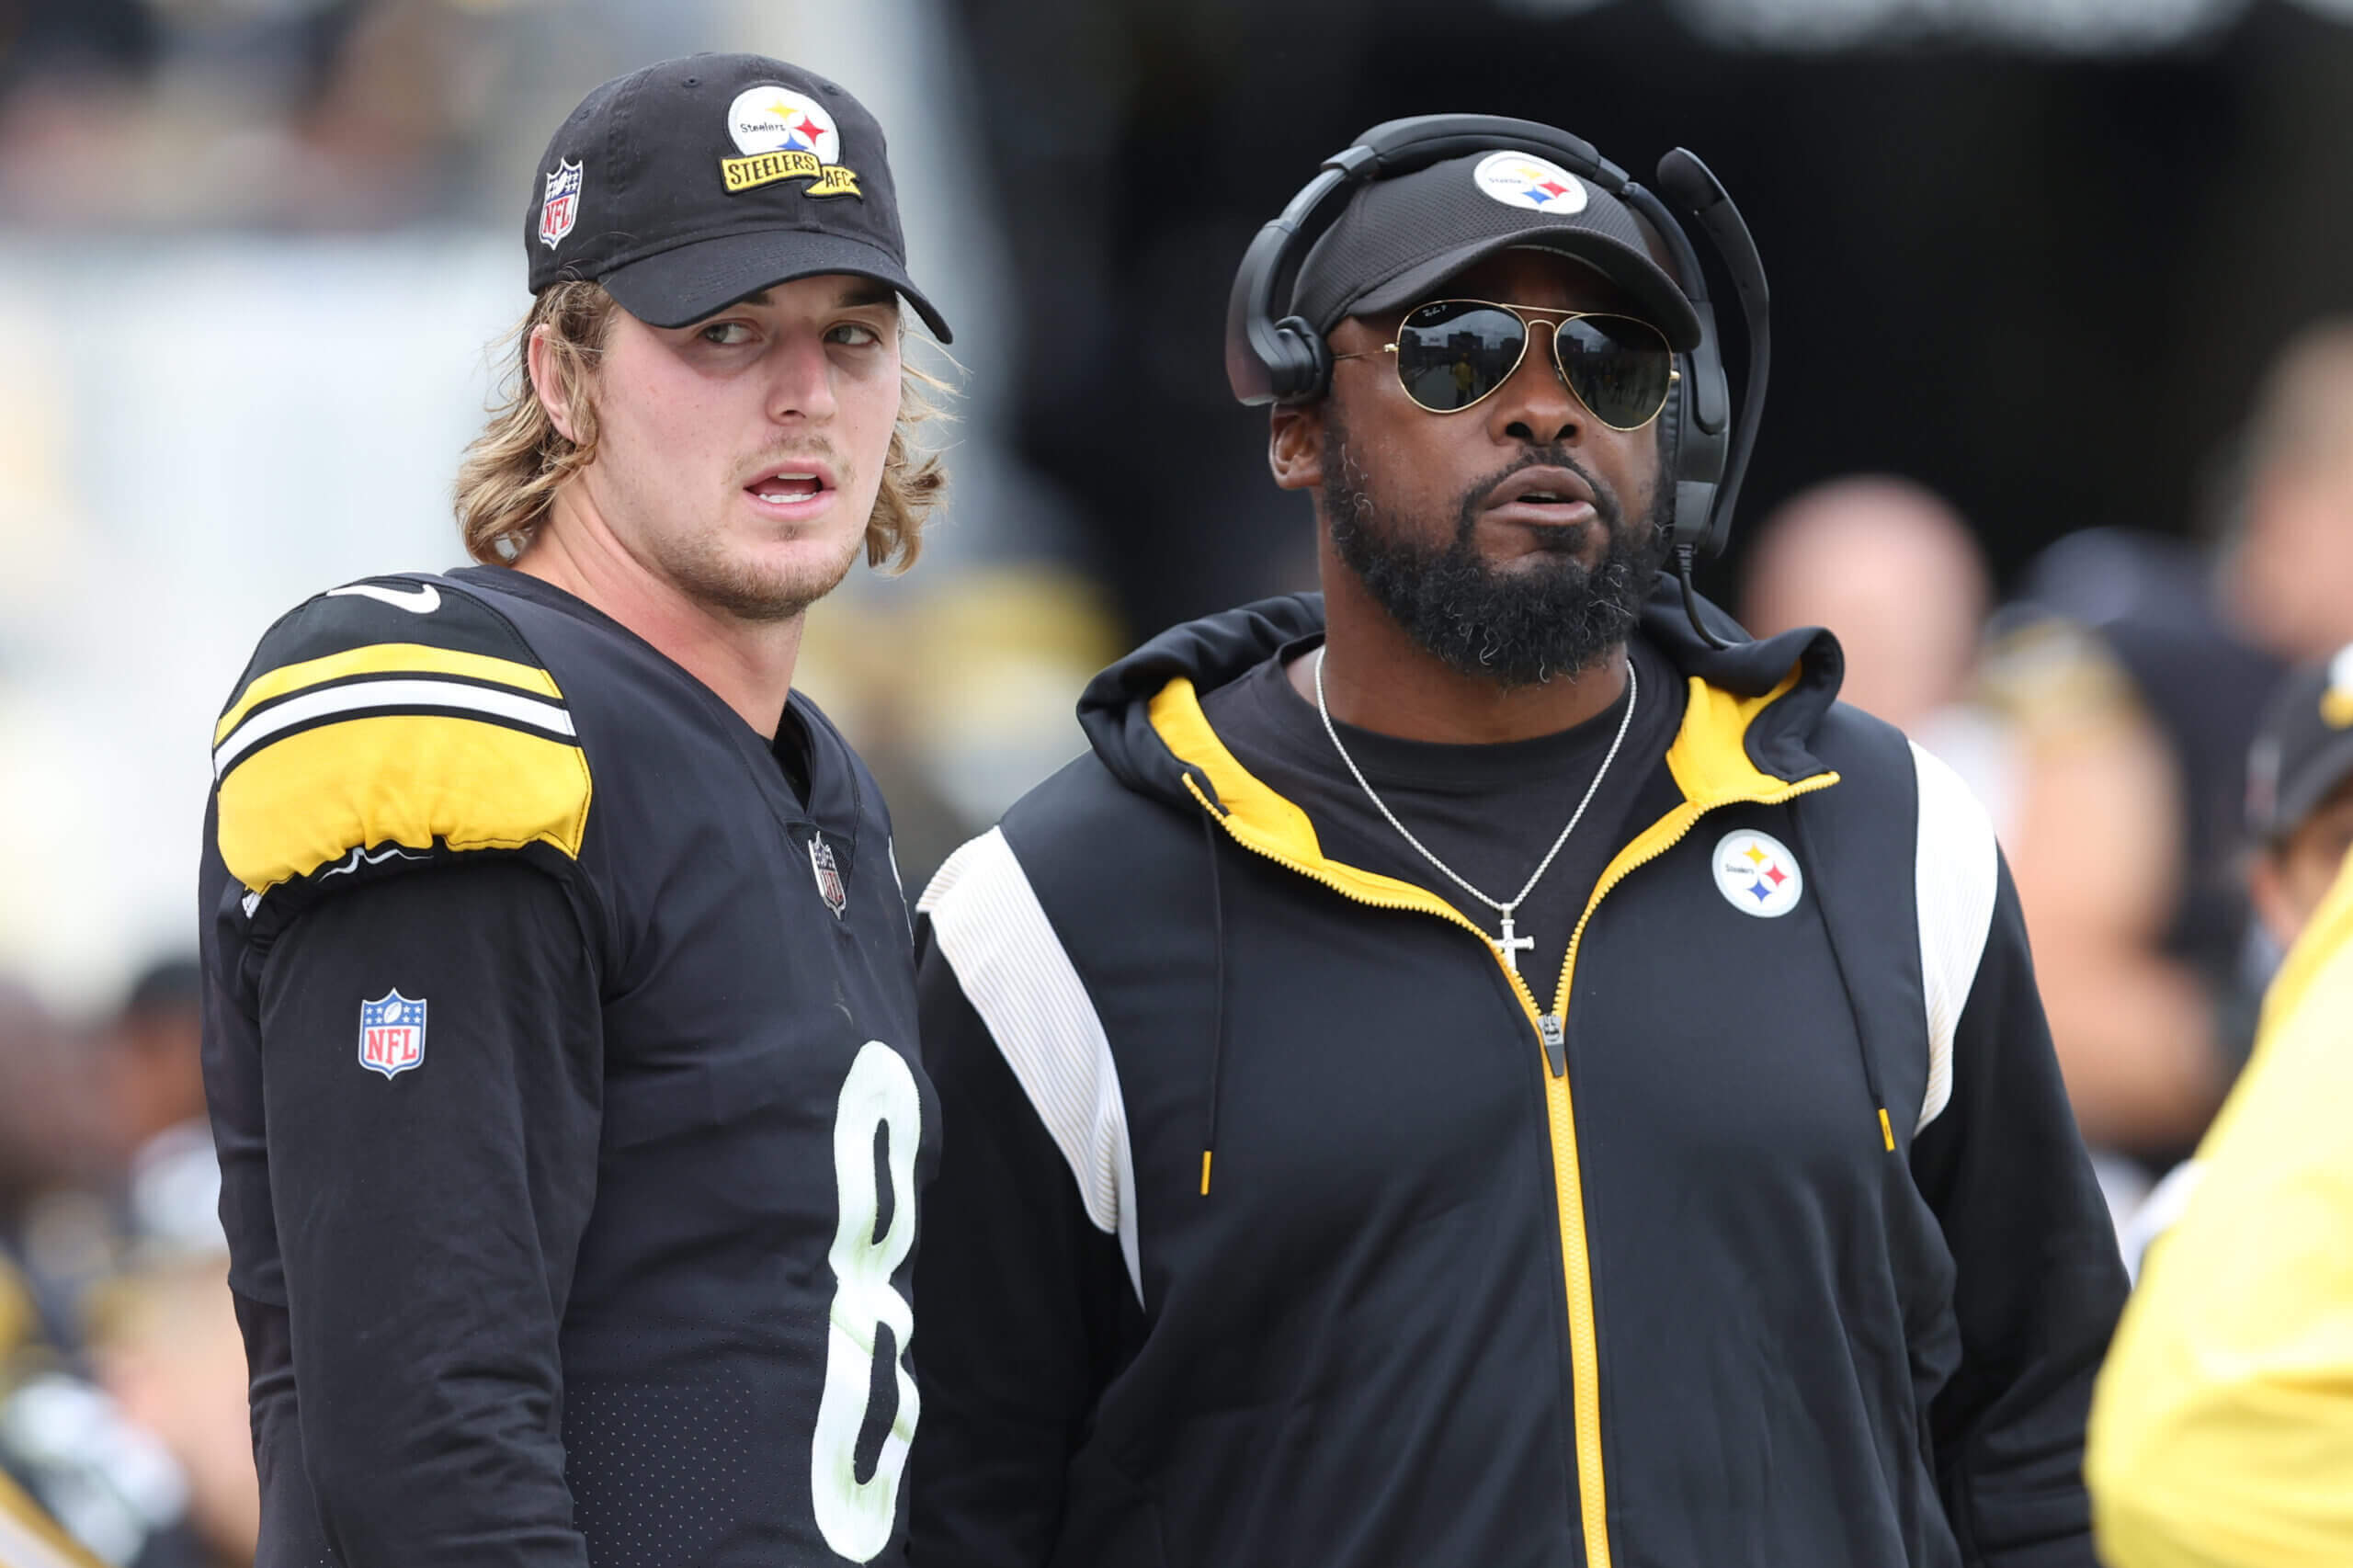 Mike Tomlin's Bold Moves: Will They Revive the Steelers or Extend the Drought?